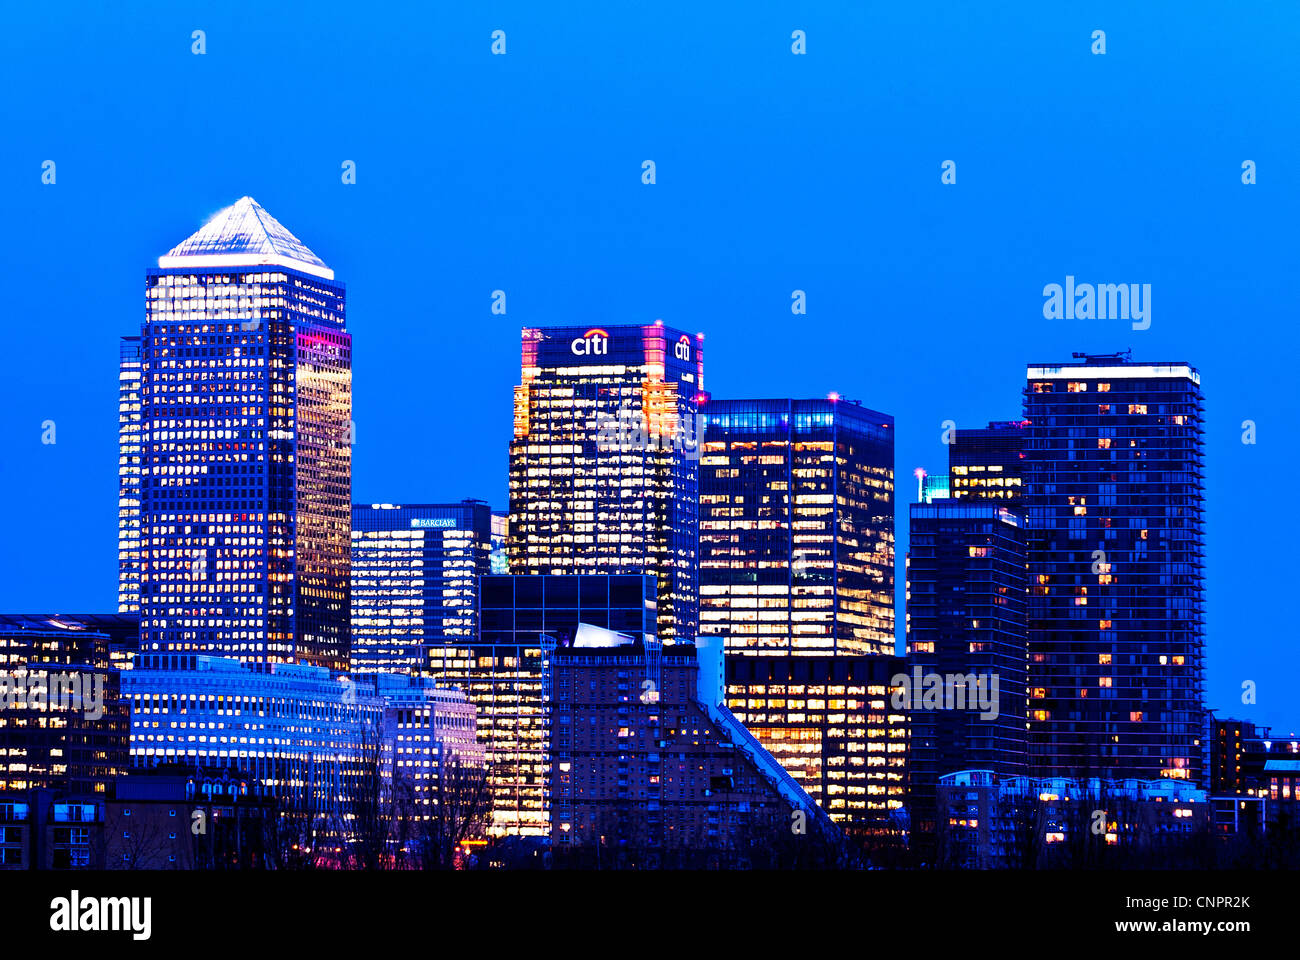 A skyline image of Canary Wharf banking sector in the evening light, London, England, UK Stock Photo